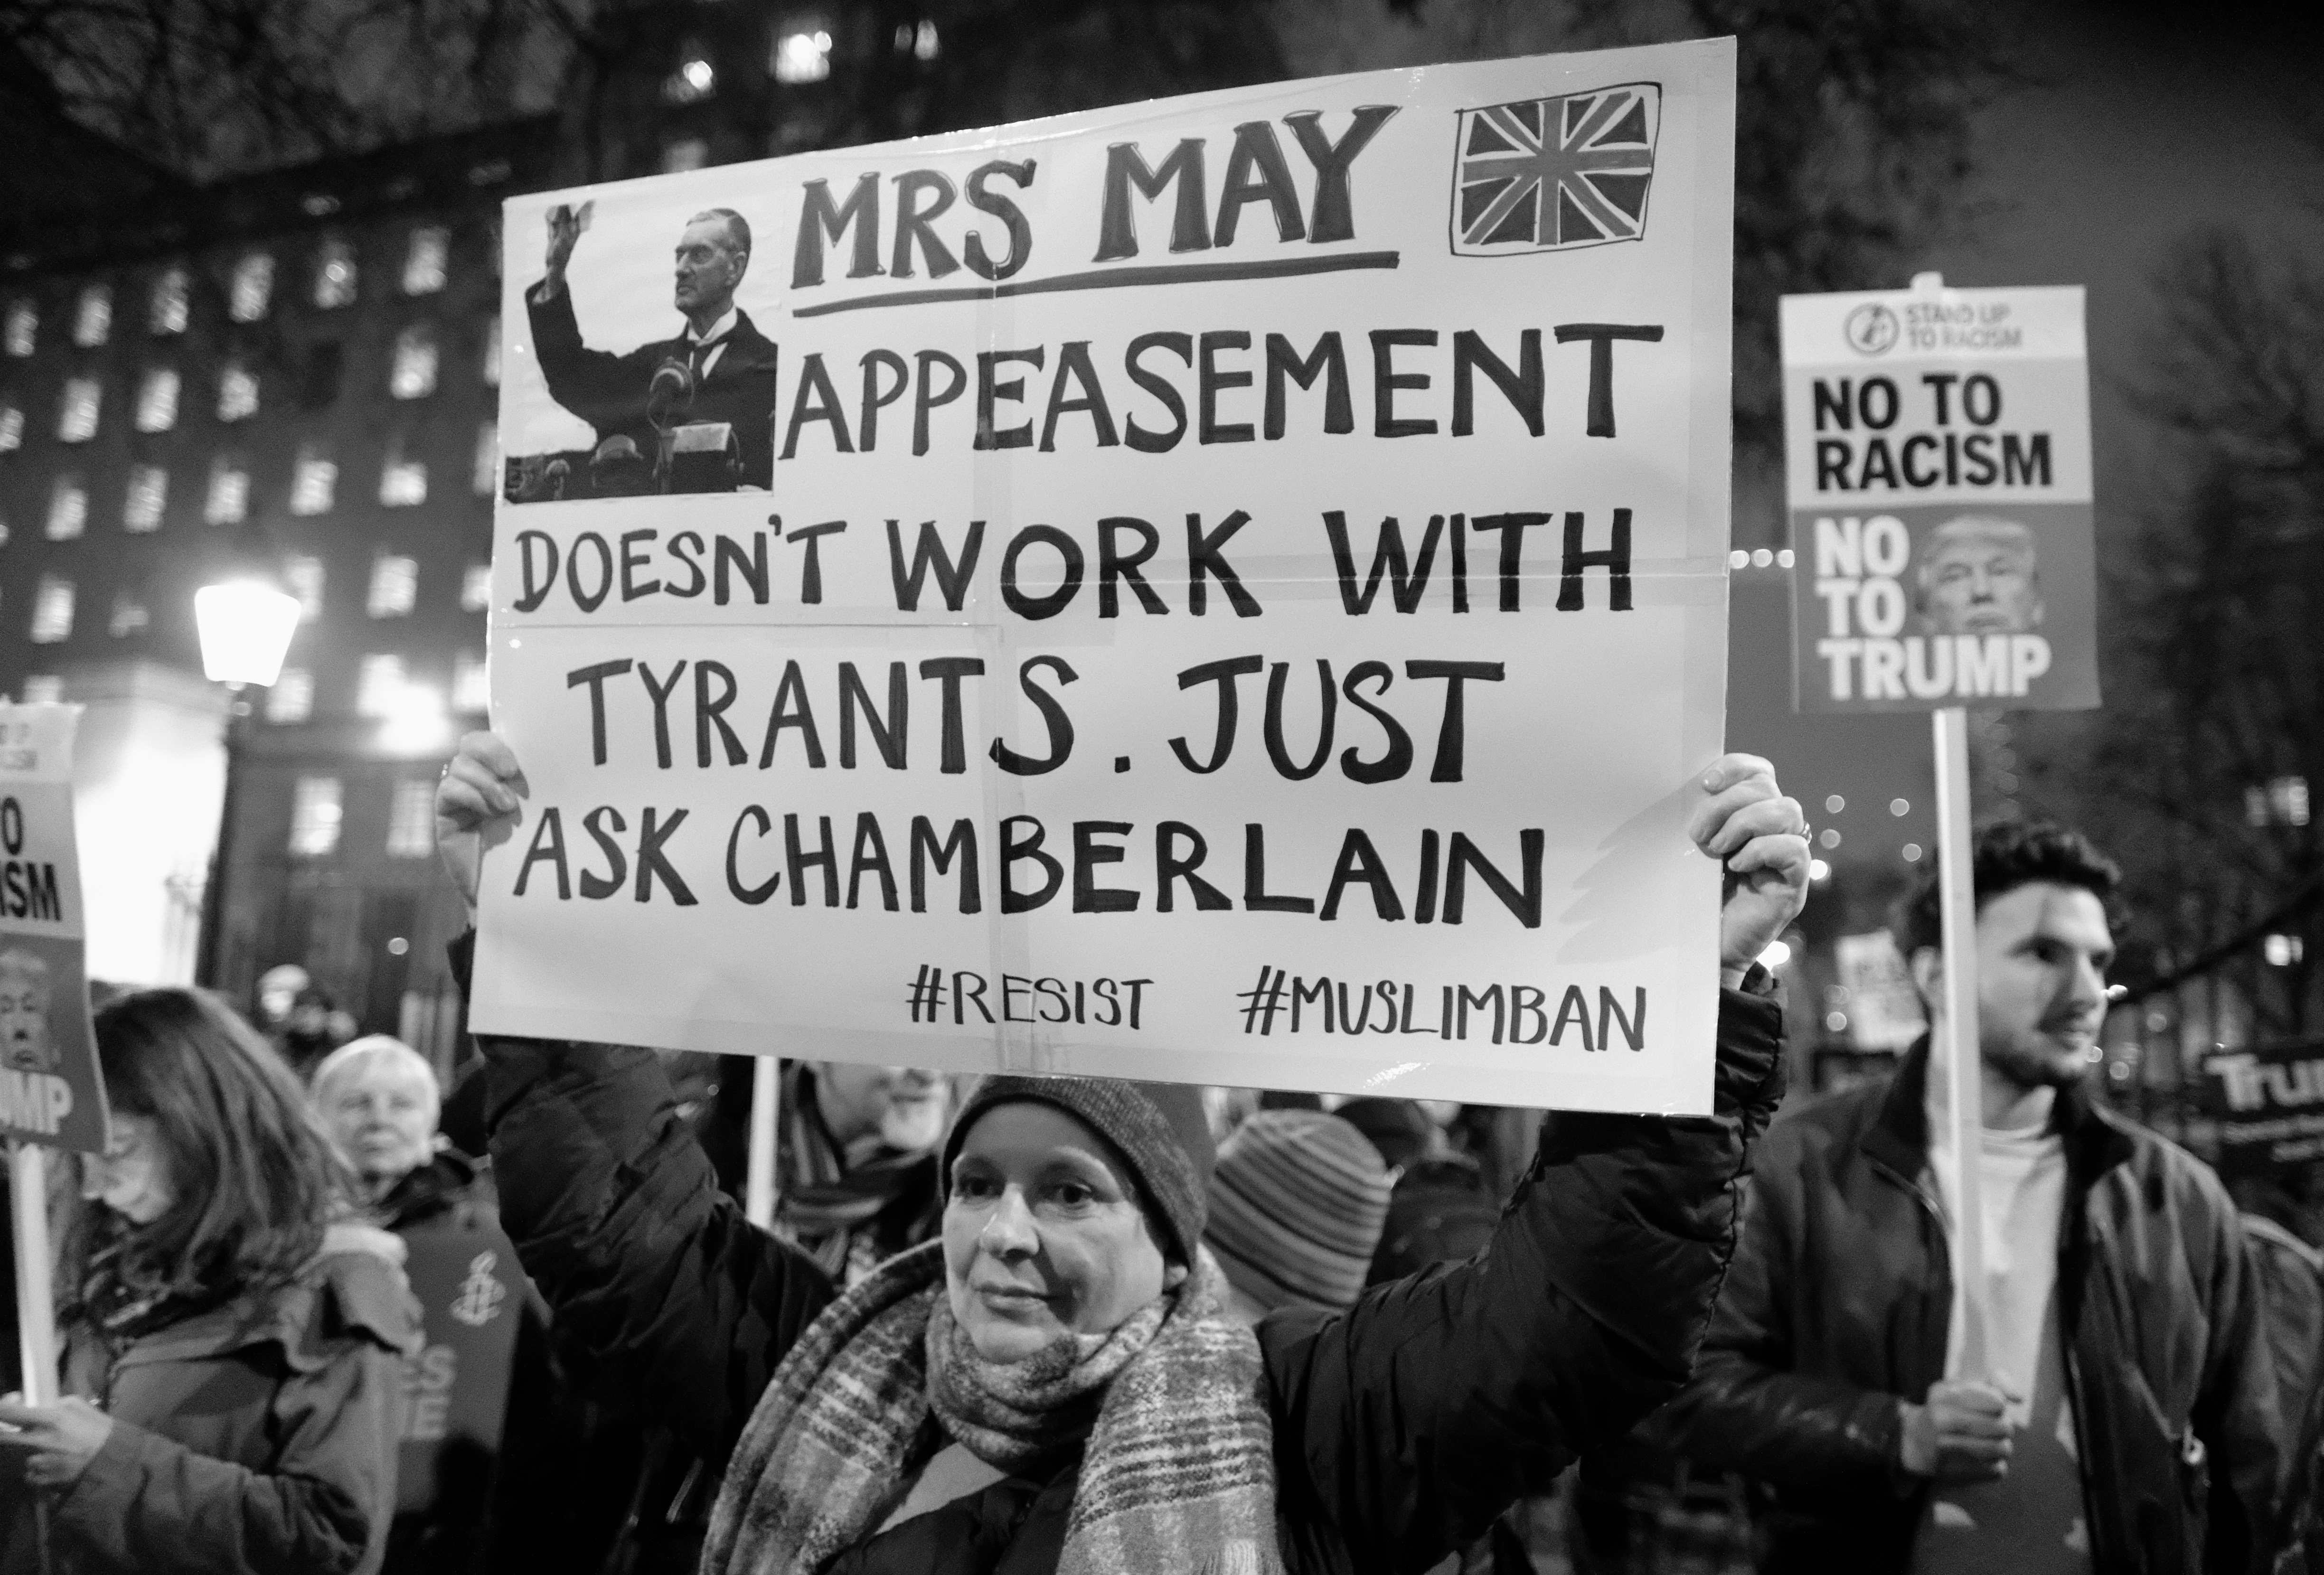 January 2017 London rally asking May to reject Trump's Muslim ban (photo: Alisdare Hickson, CC)